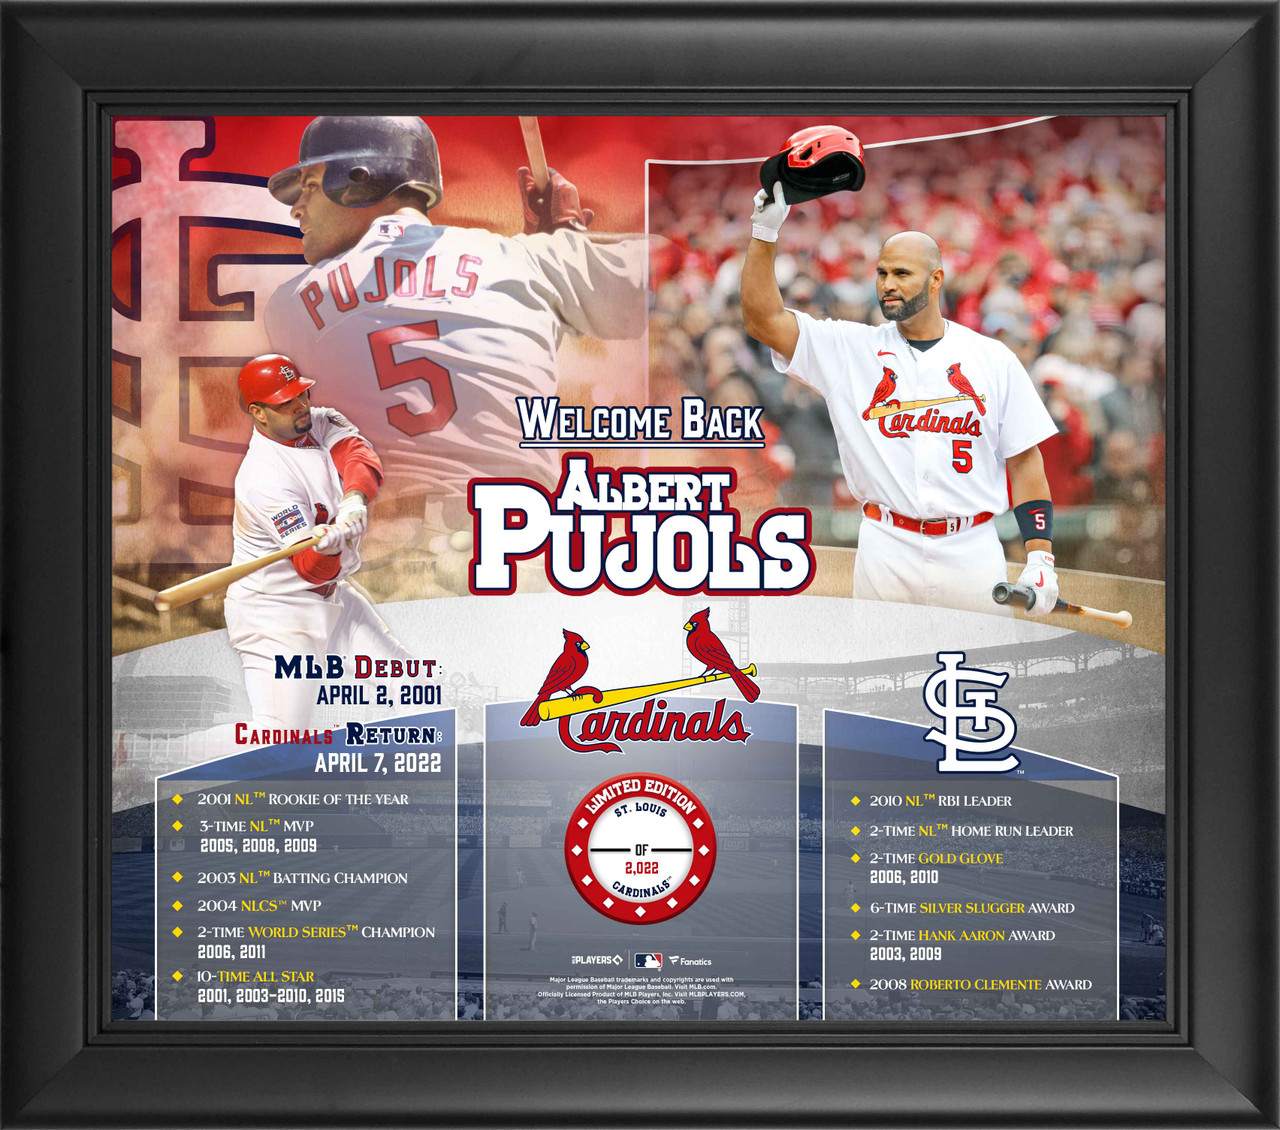 Albert Pujols Welcome Back Framed Photo Collage Exclusive Limited